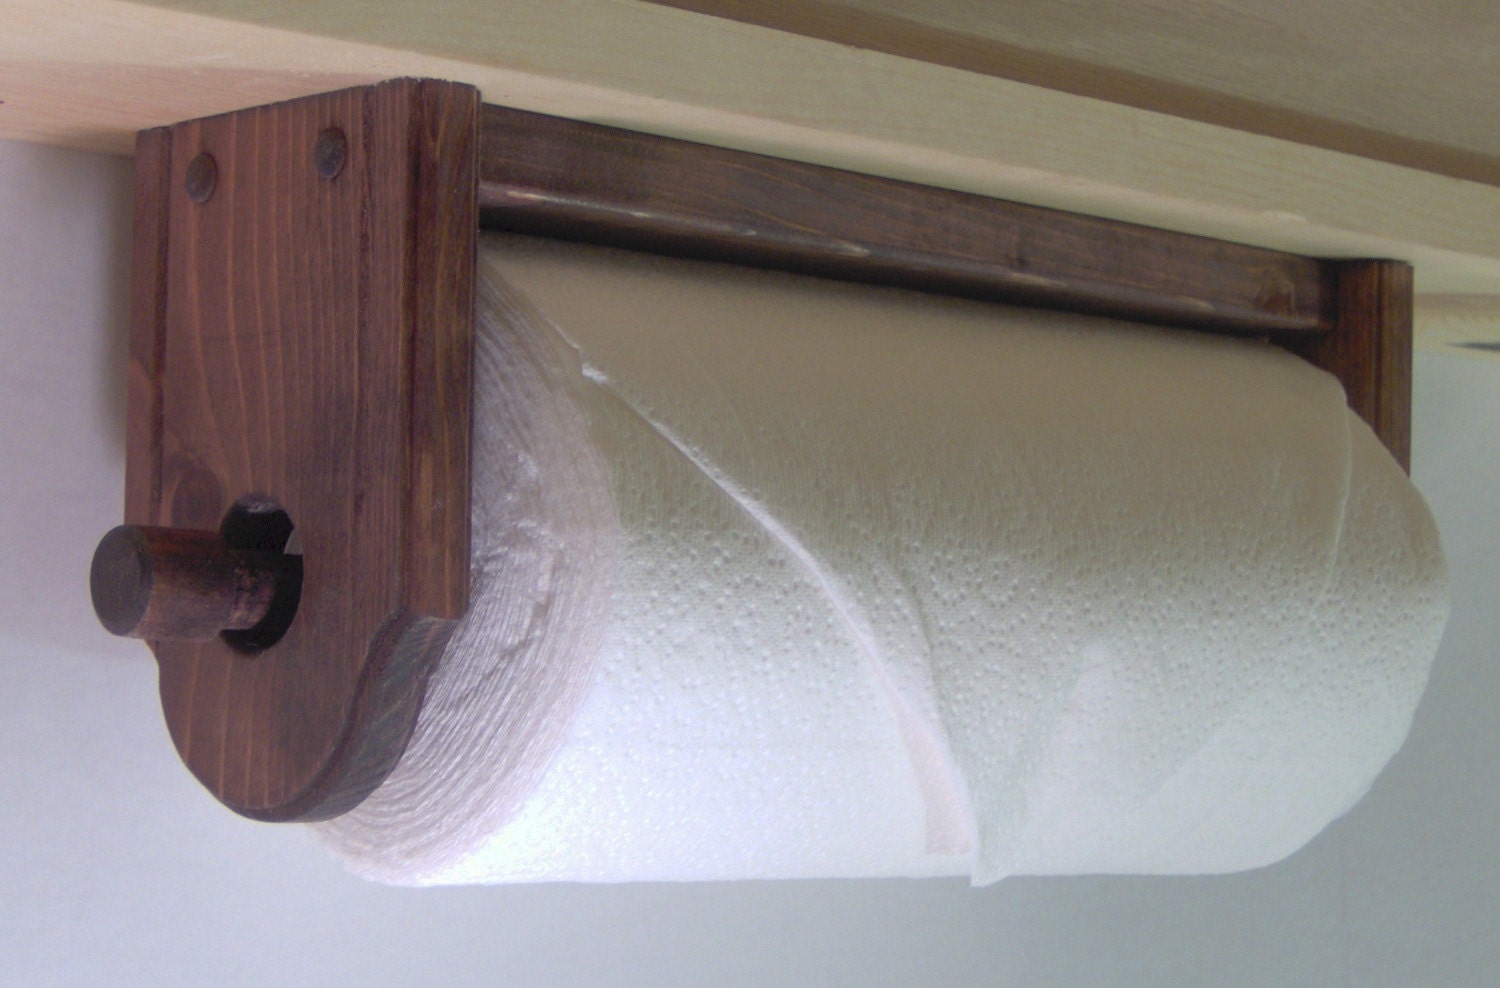 Red Mahogany paper towel holder under the counter/wall mount